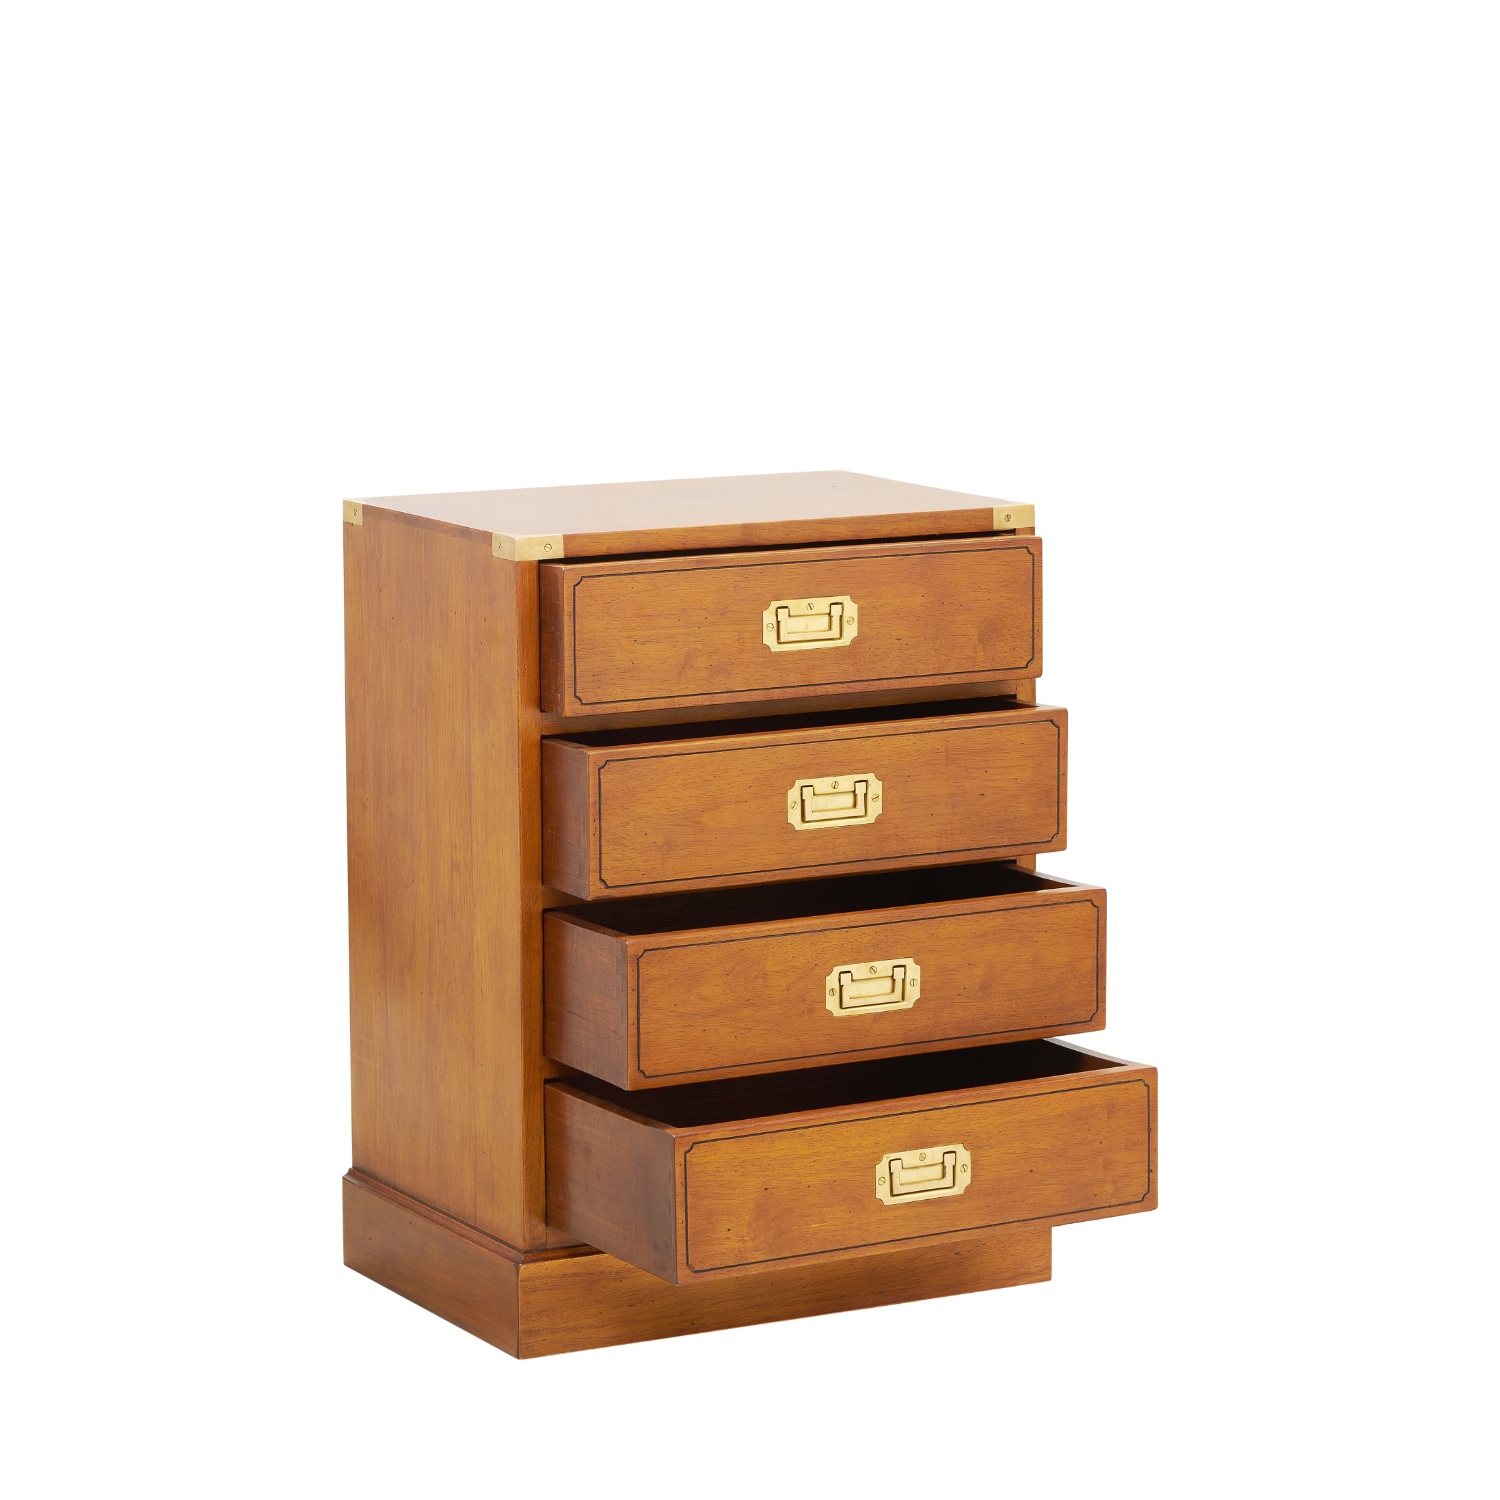 GLASGOW SMALL CHEST OF DRAWERS